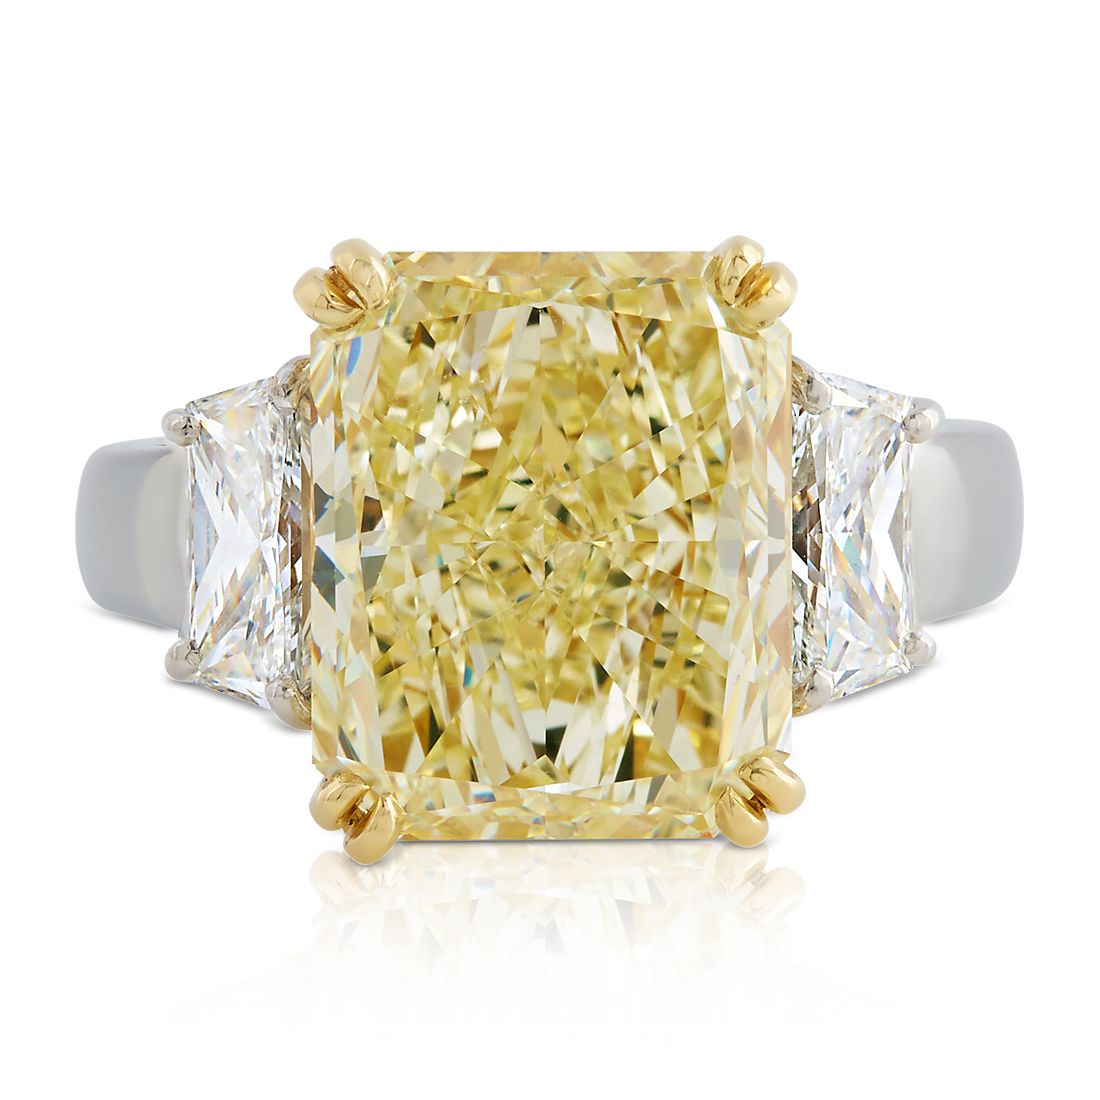 Estate Fancy Light Yellow Diamond Ring in Platinum and 18k Yellow Gold (9.72 ct. tw.)